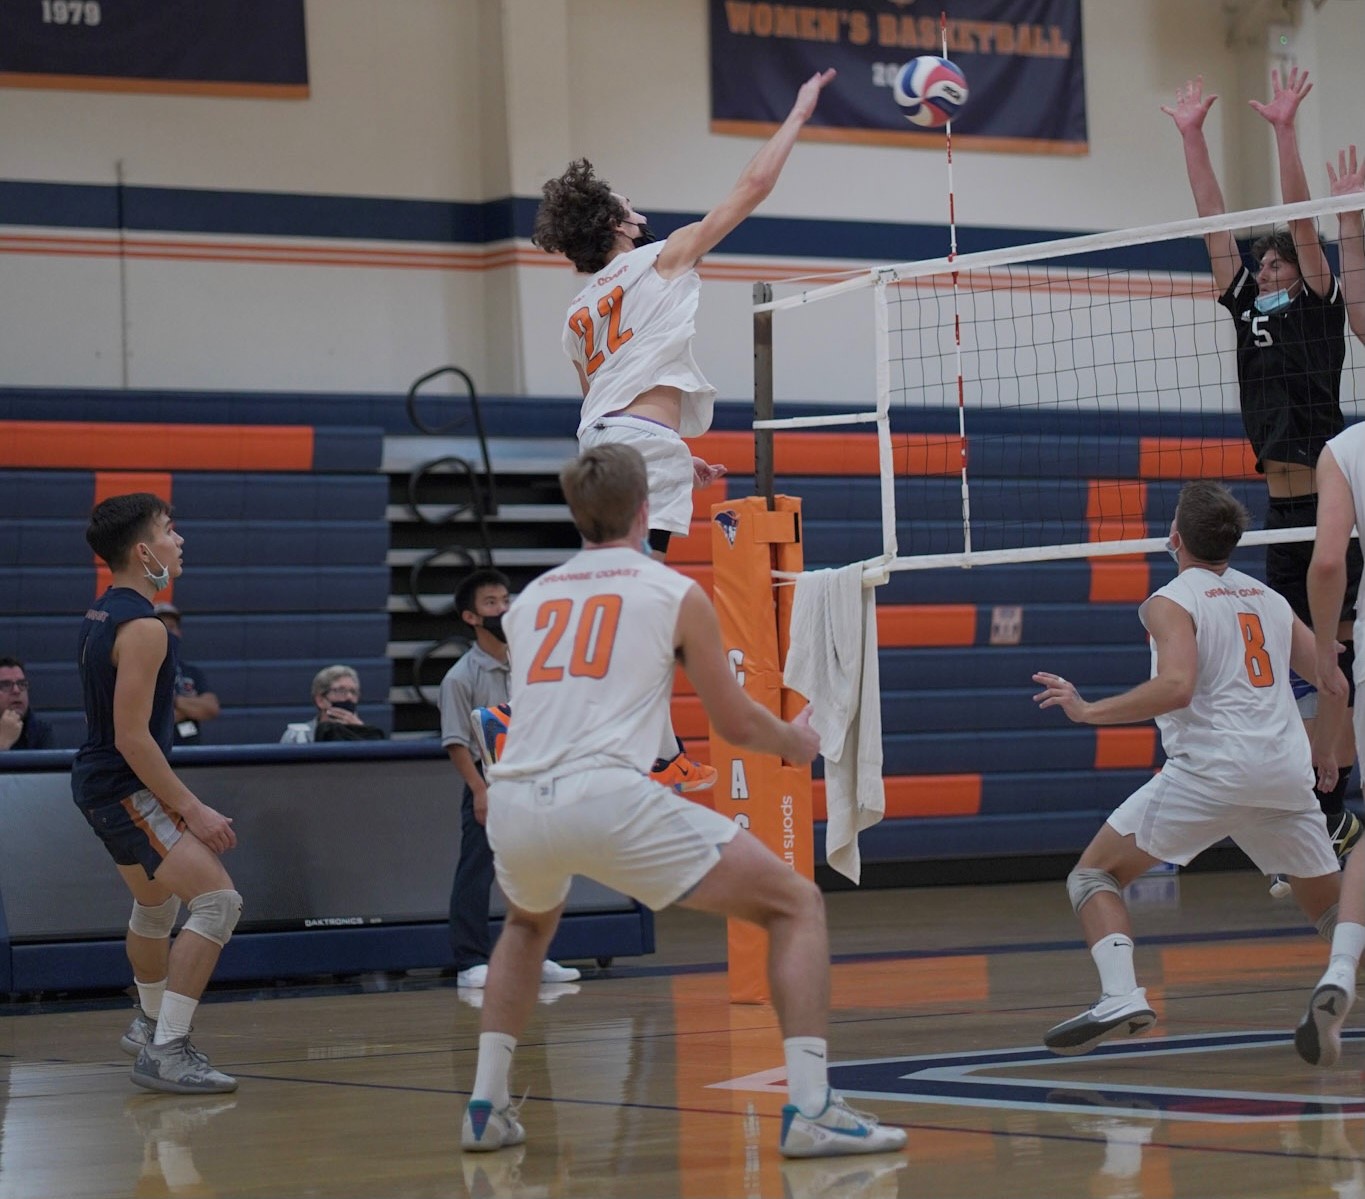 Pirates go unbeaten in OEC with four-set win over Irvine Valley